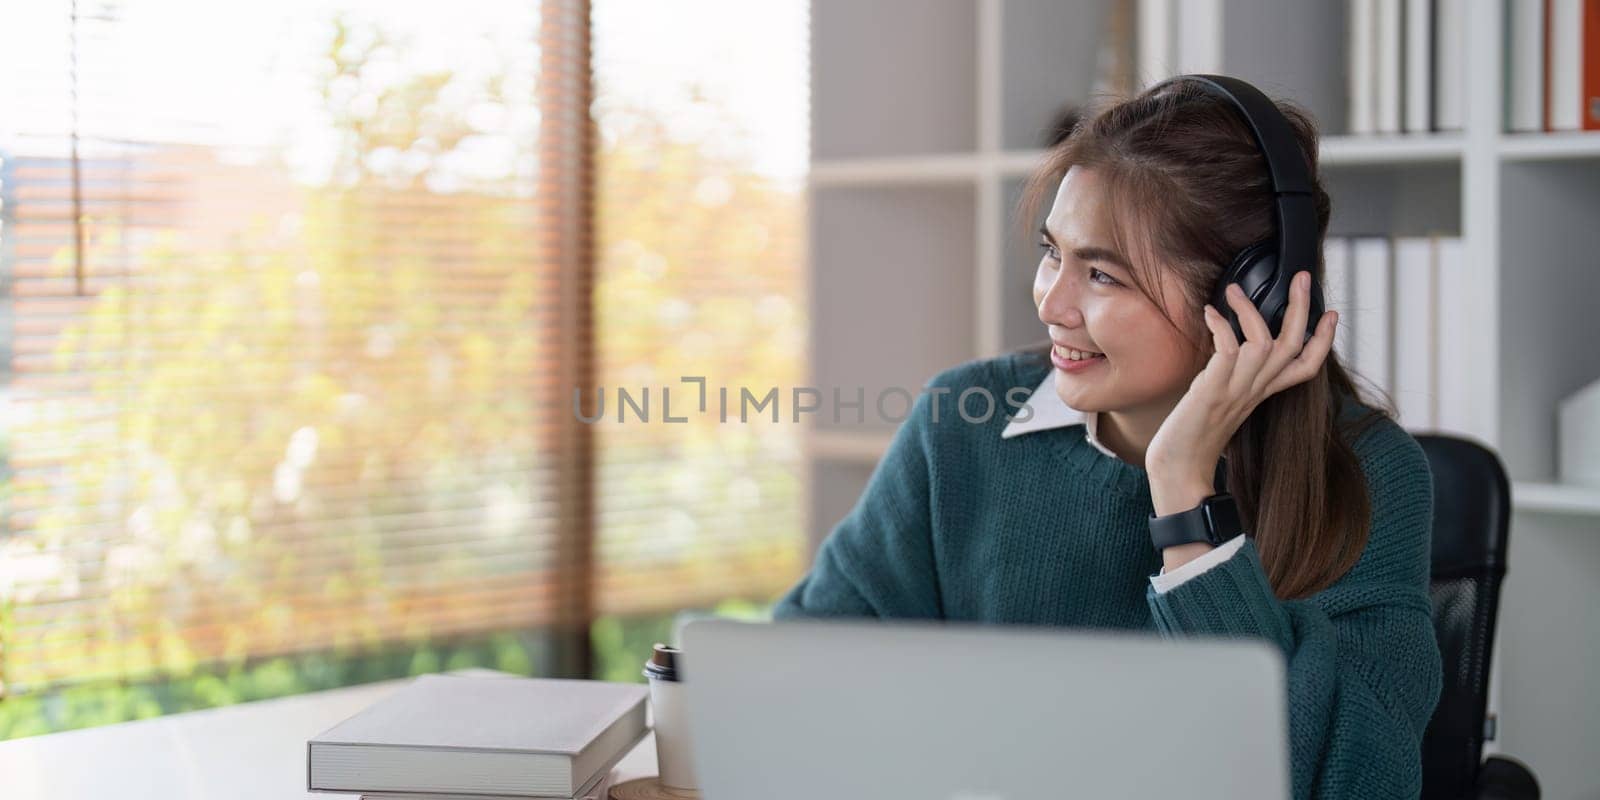 Young woman smiling while wearing headphones and using a laptop in a bright home office.